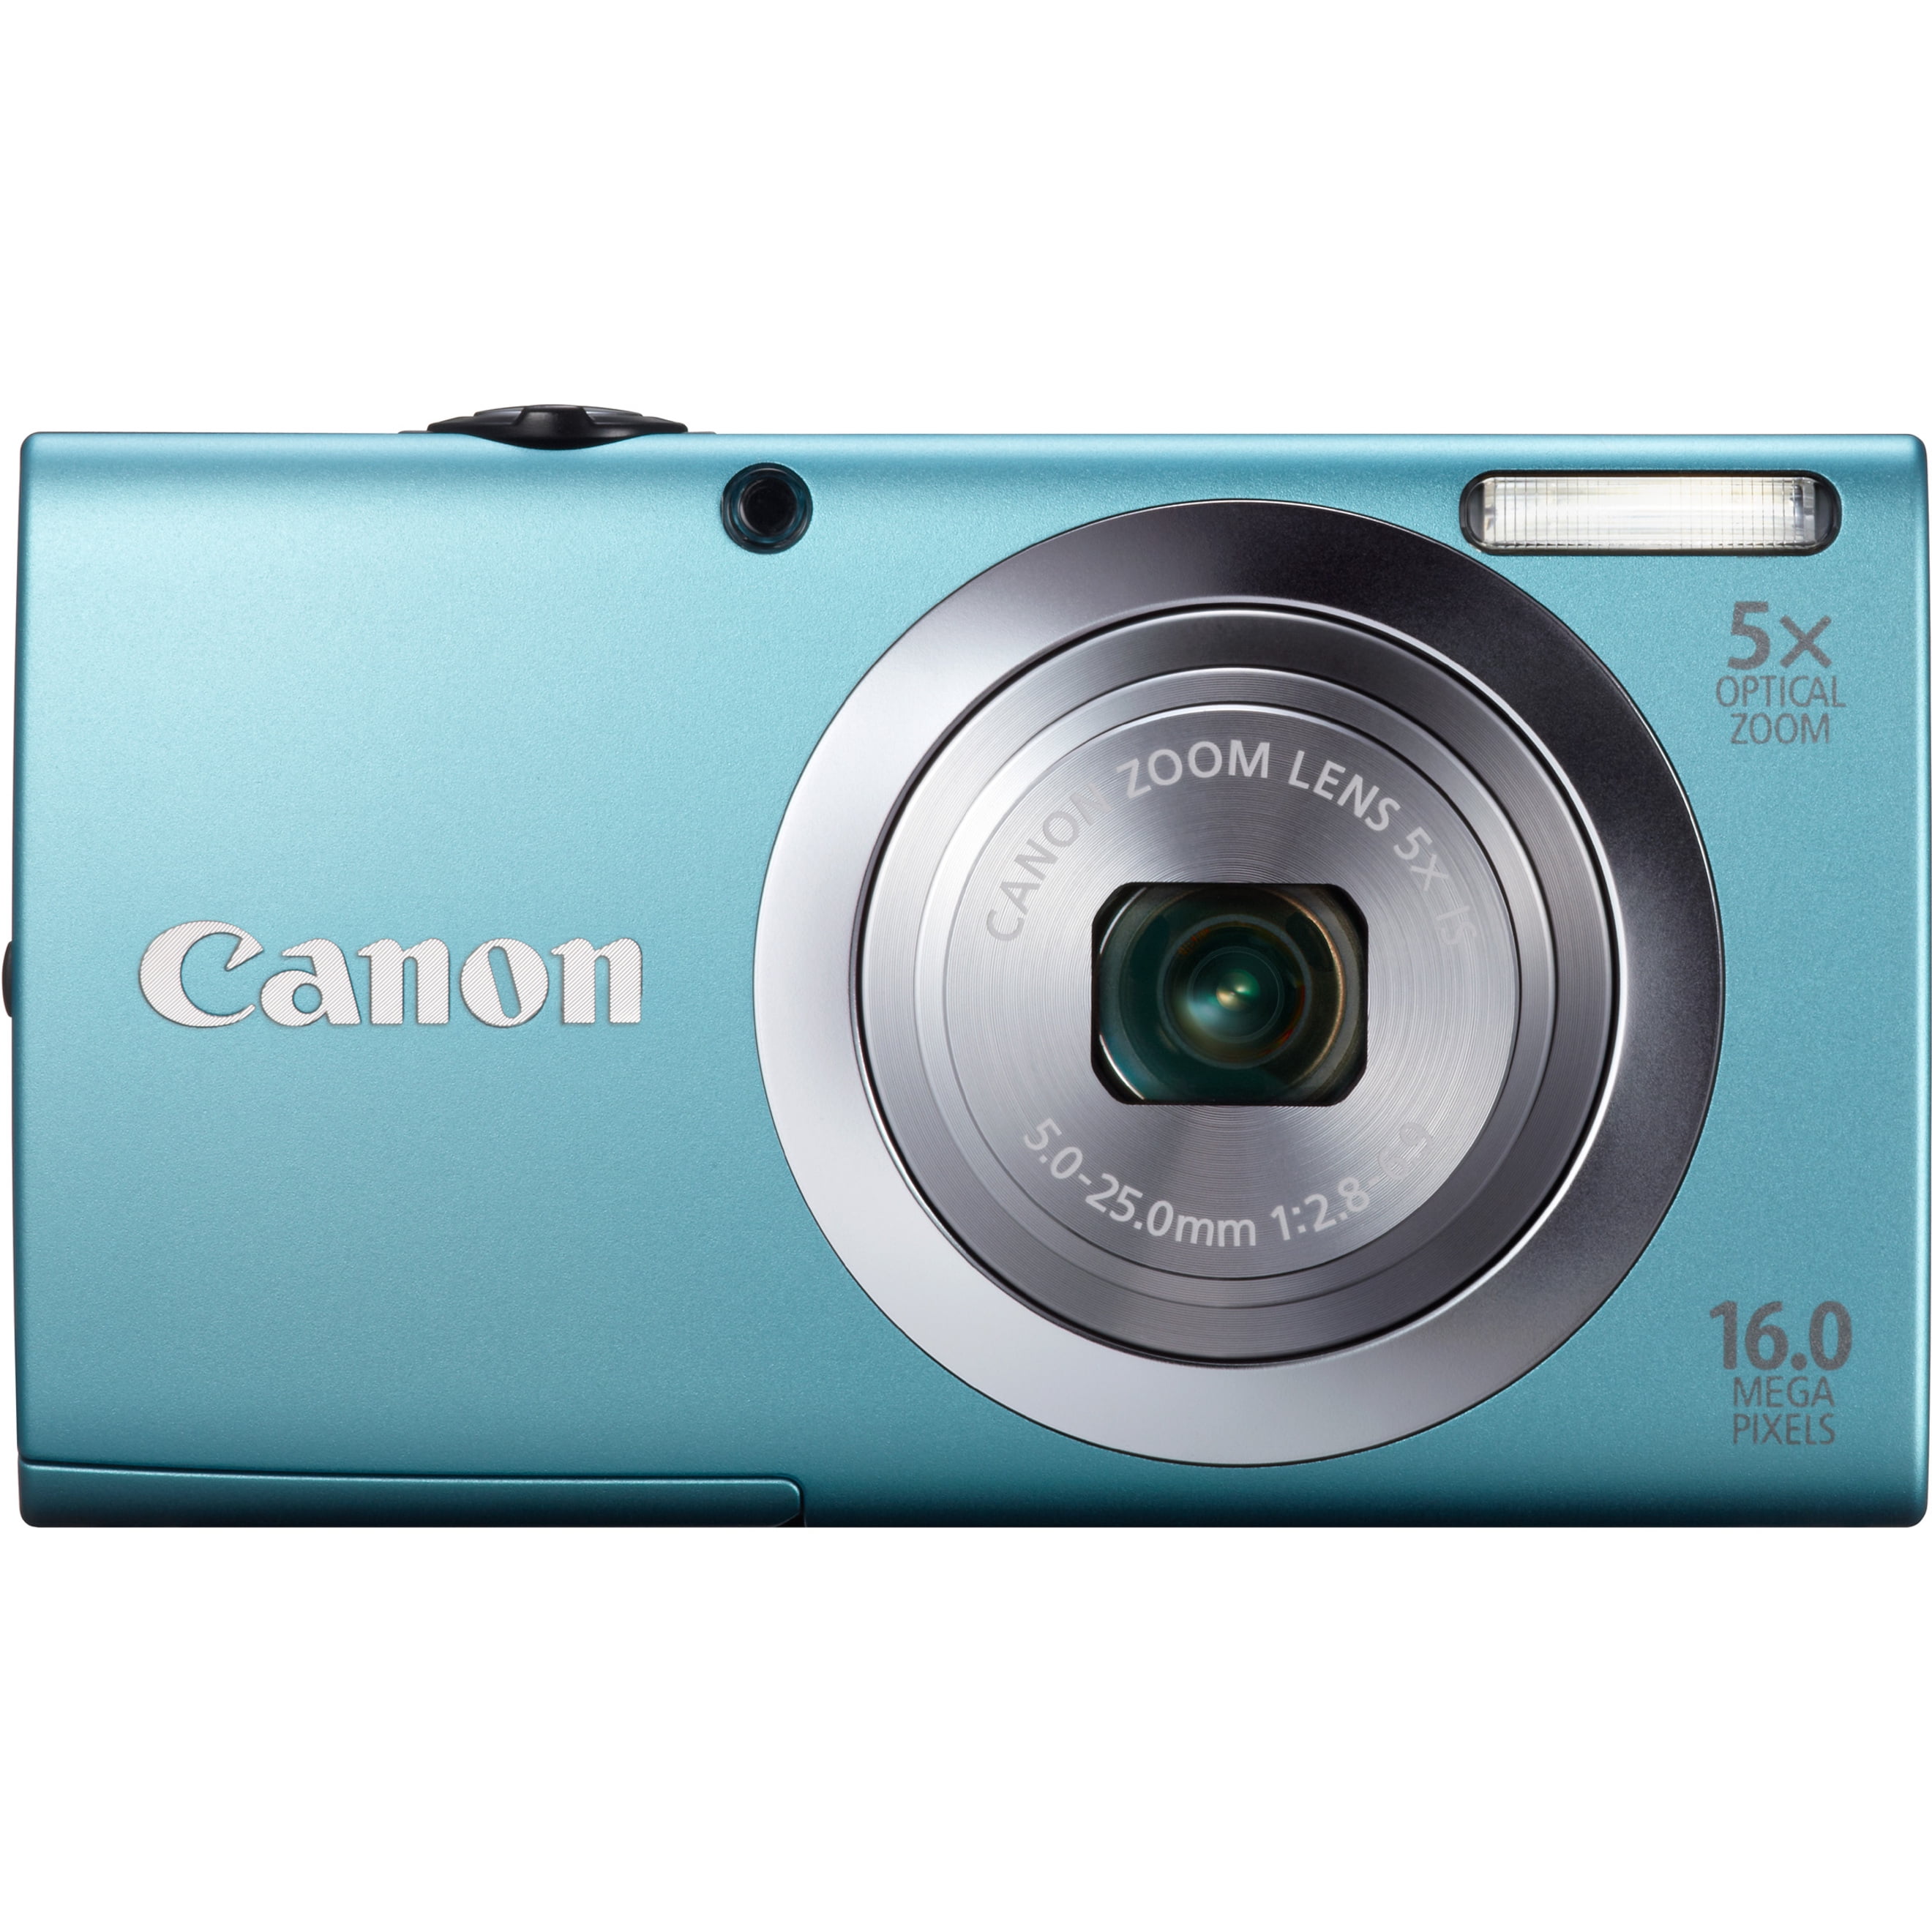 Canon PowerShot A IS  Megapixel Compact Camera, Blue